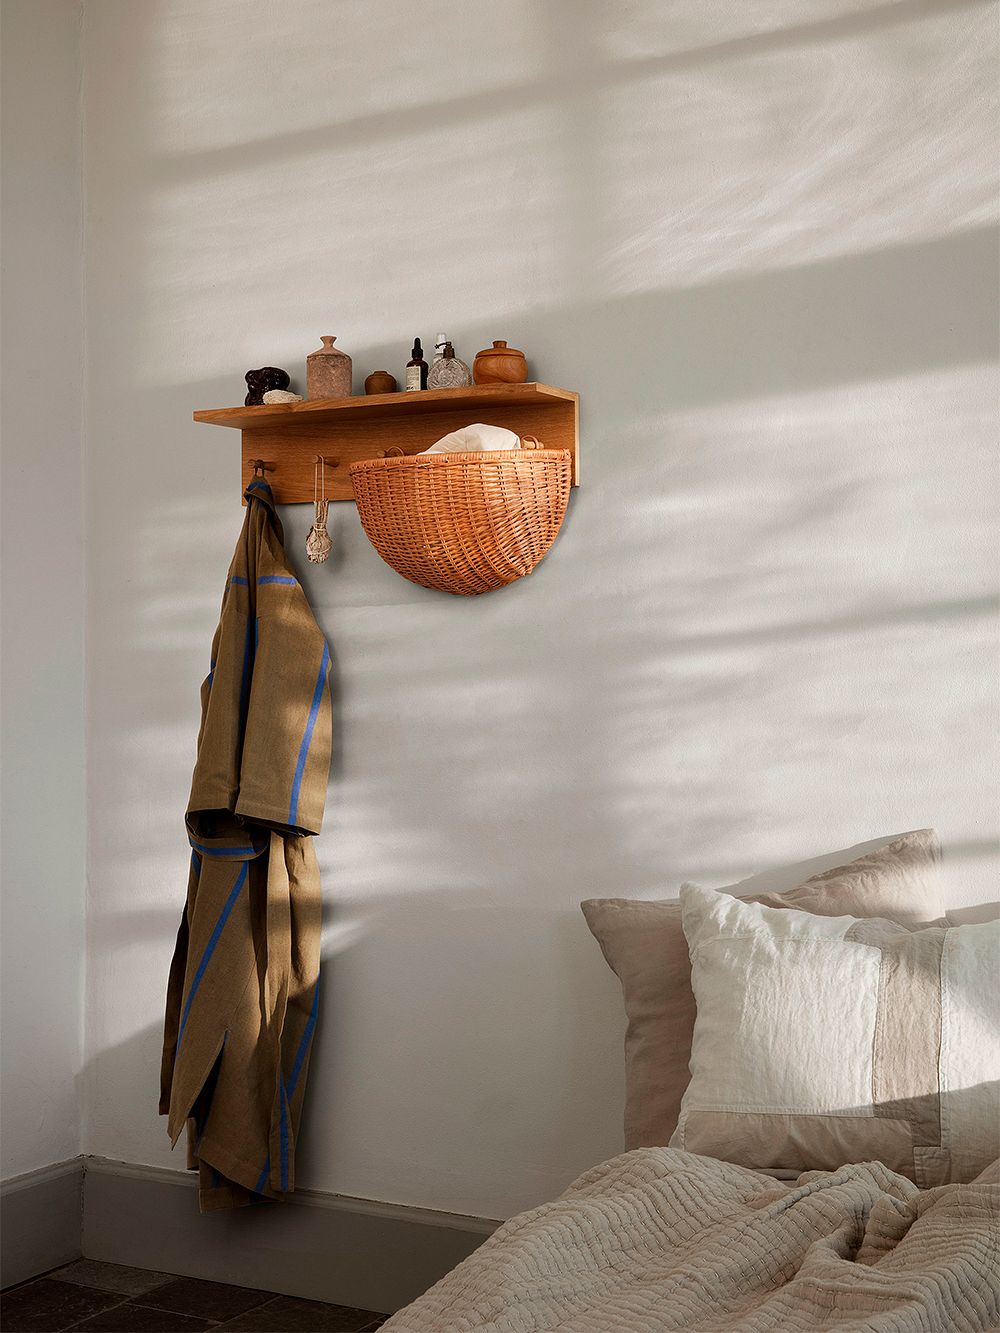 An image of ferm LIVING's Place rack and Braided wall pocket as part of the bedroom decor.